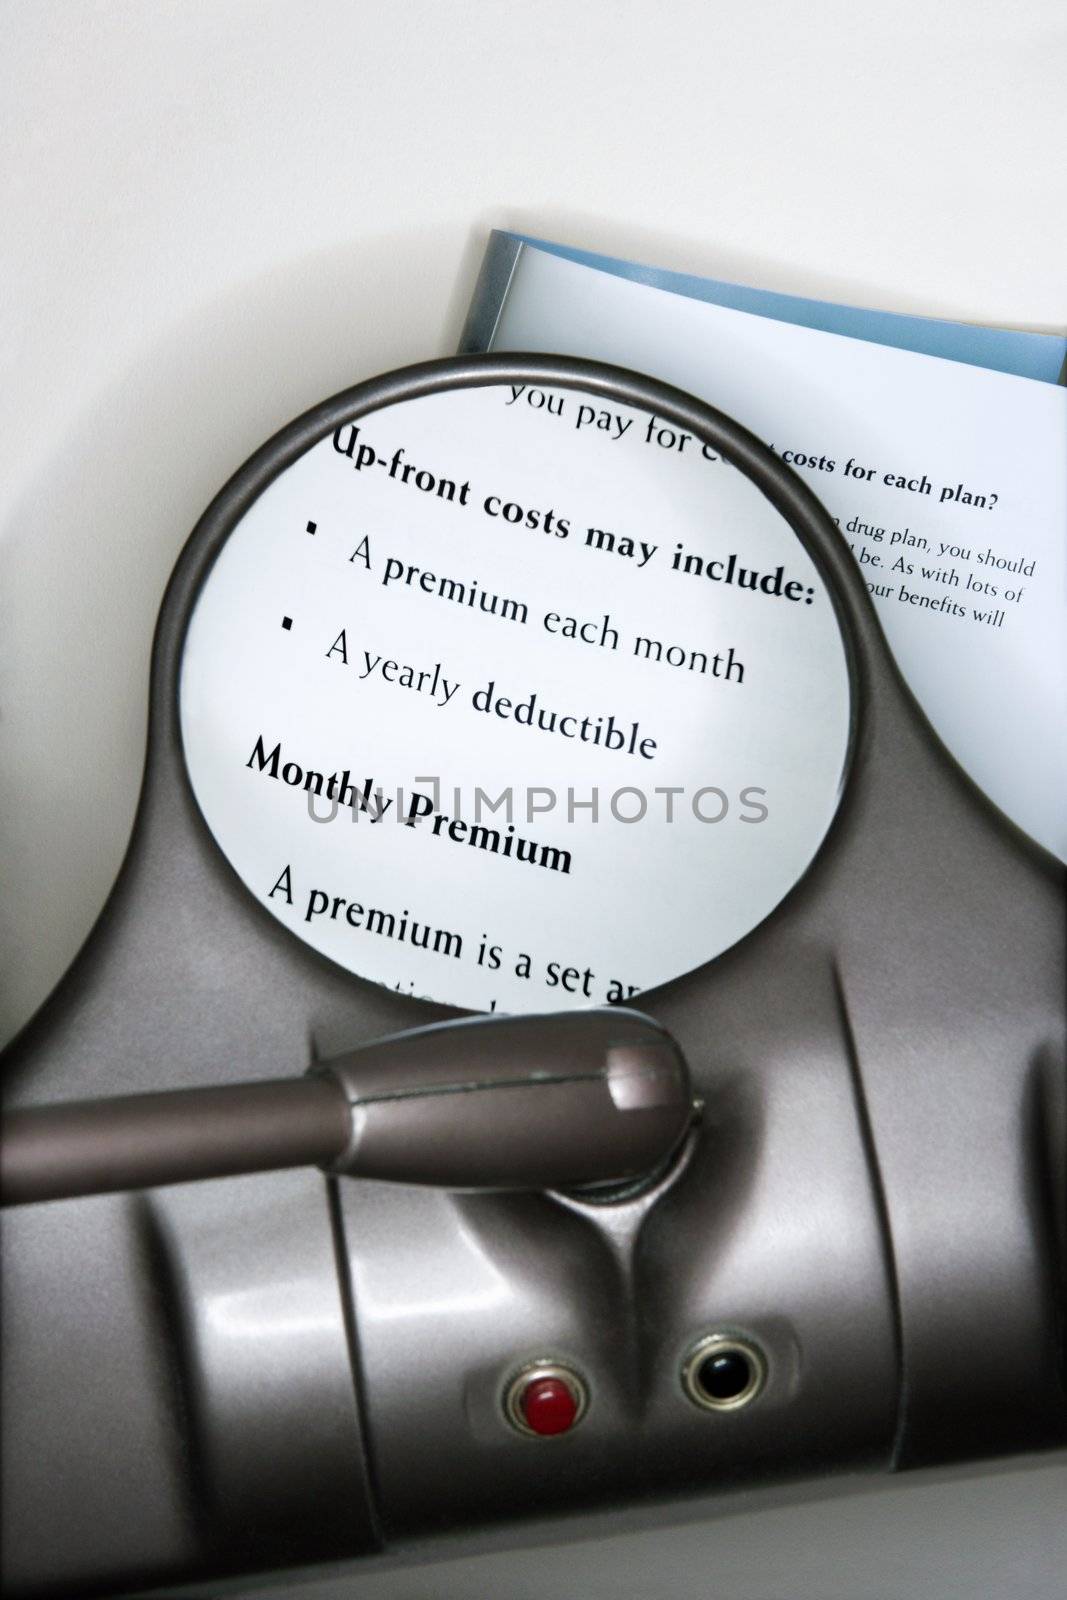 Vision magnifying glass used to view health insurance information.